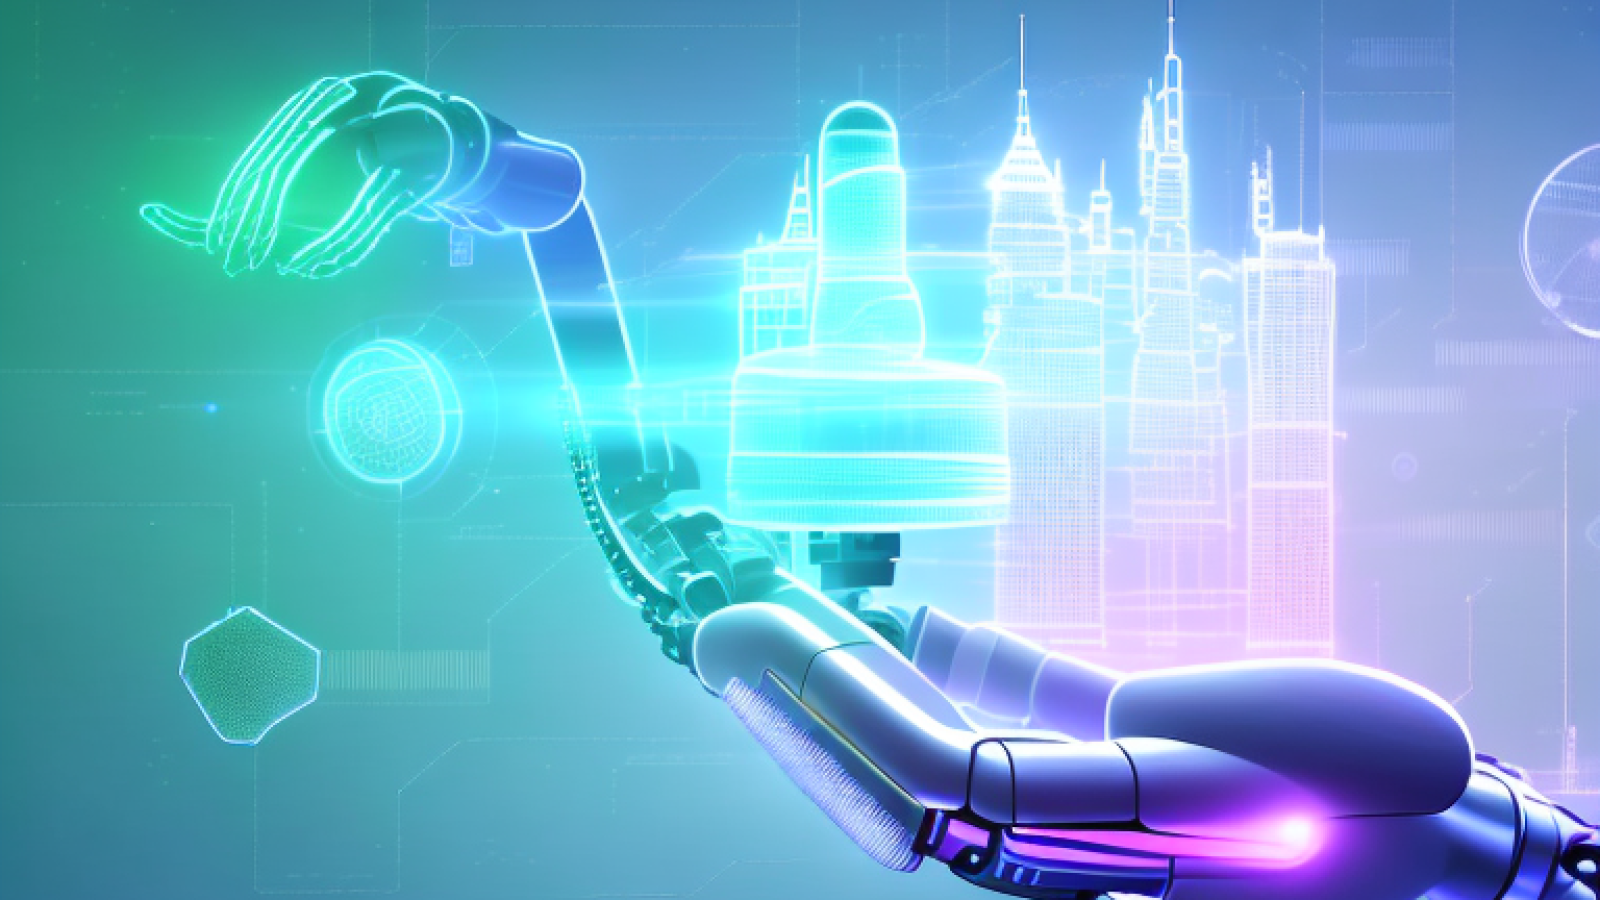 A futuristic cityscape with a robotic arm reaching out to a glowing data cloud